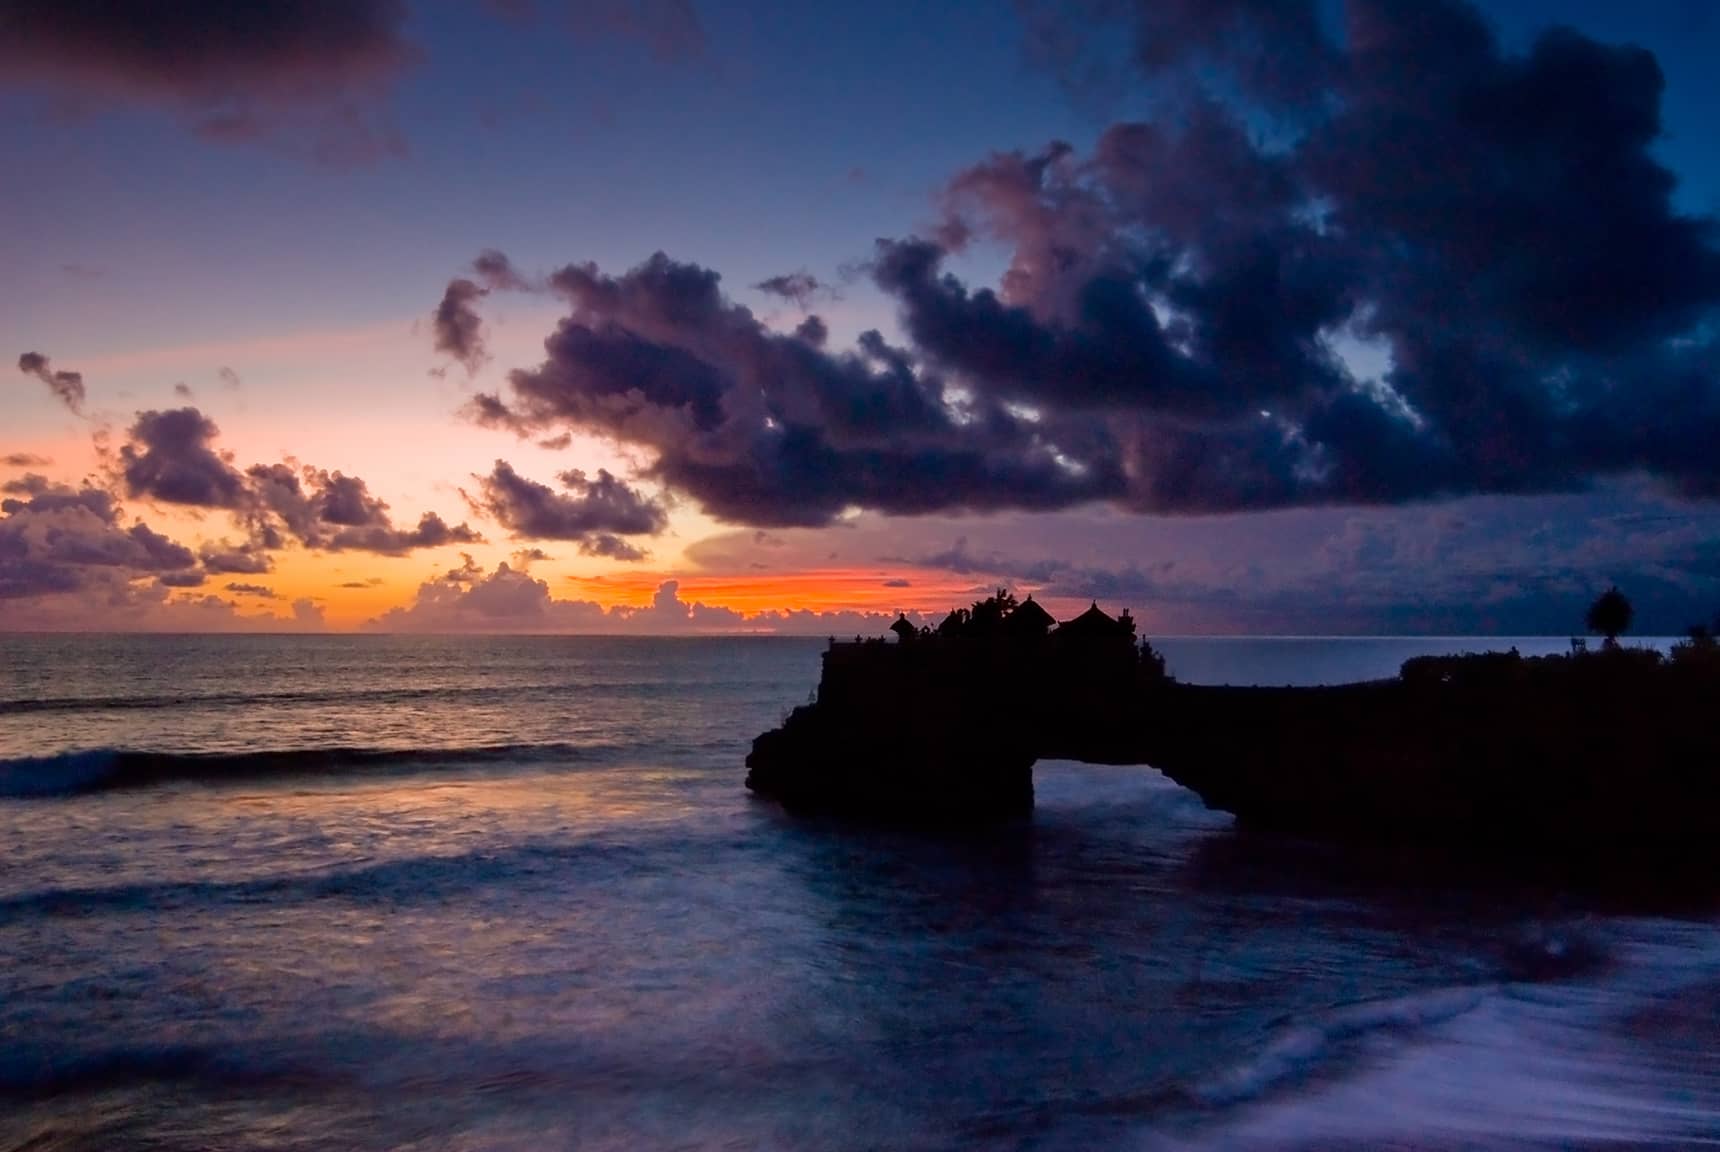 Professional photos of sunsets in Bali Indonesia - one of the Tanah Lot temples